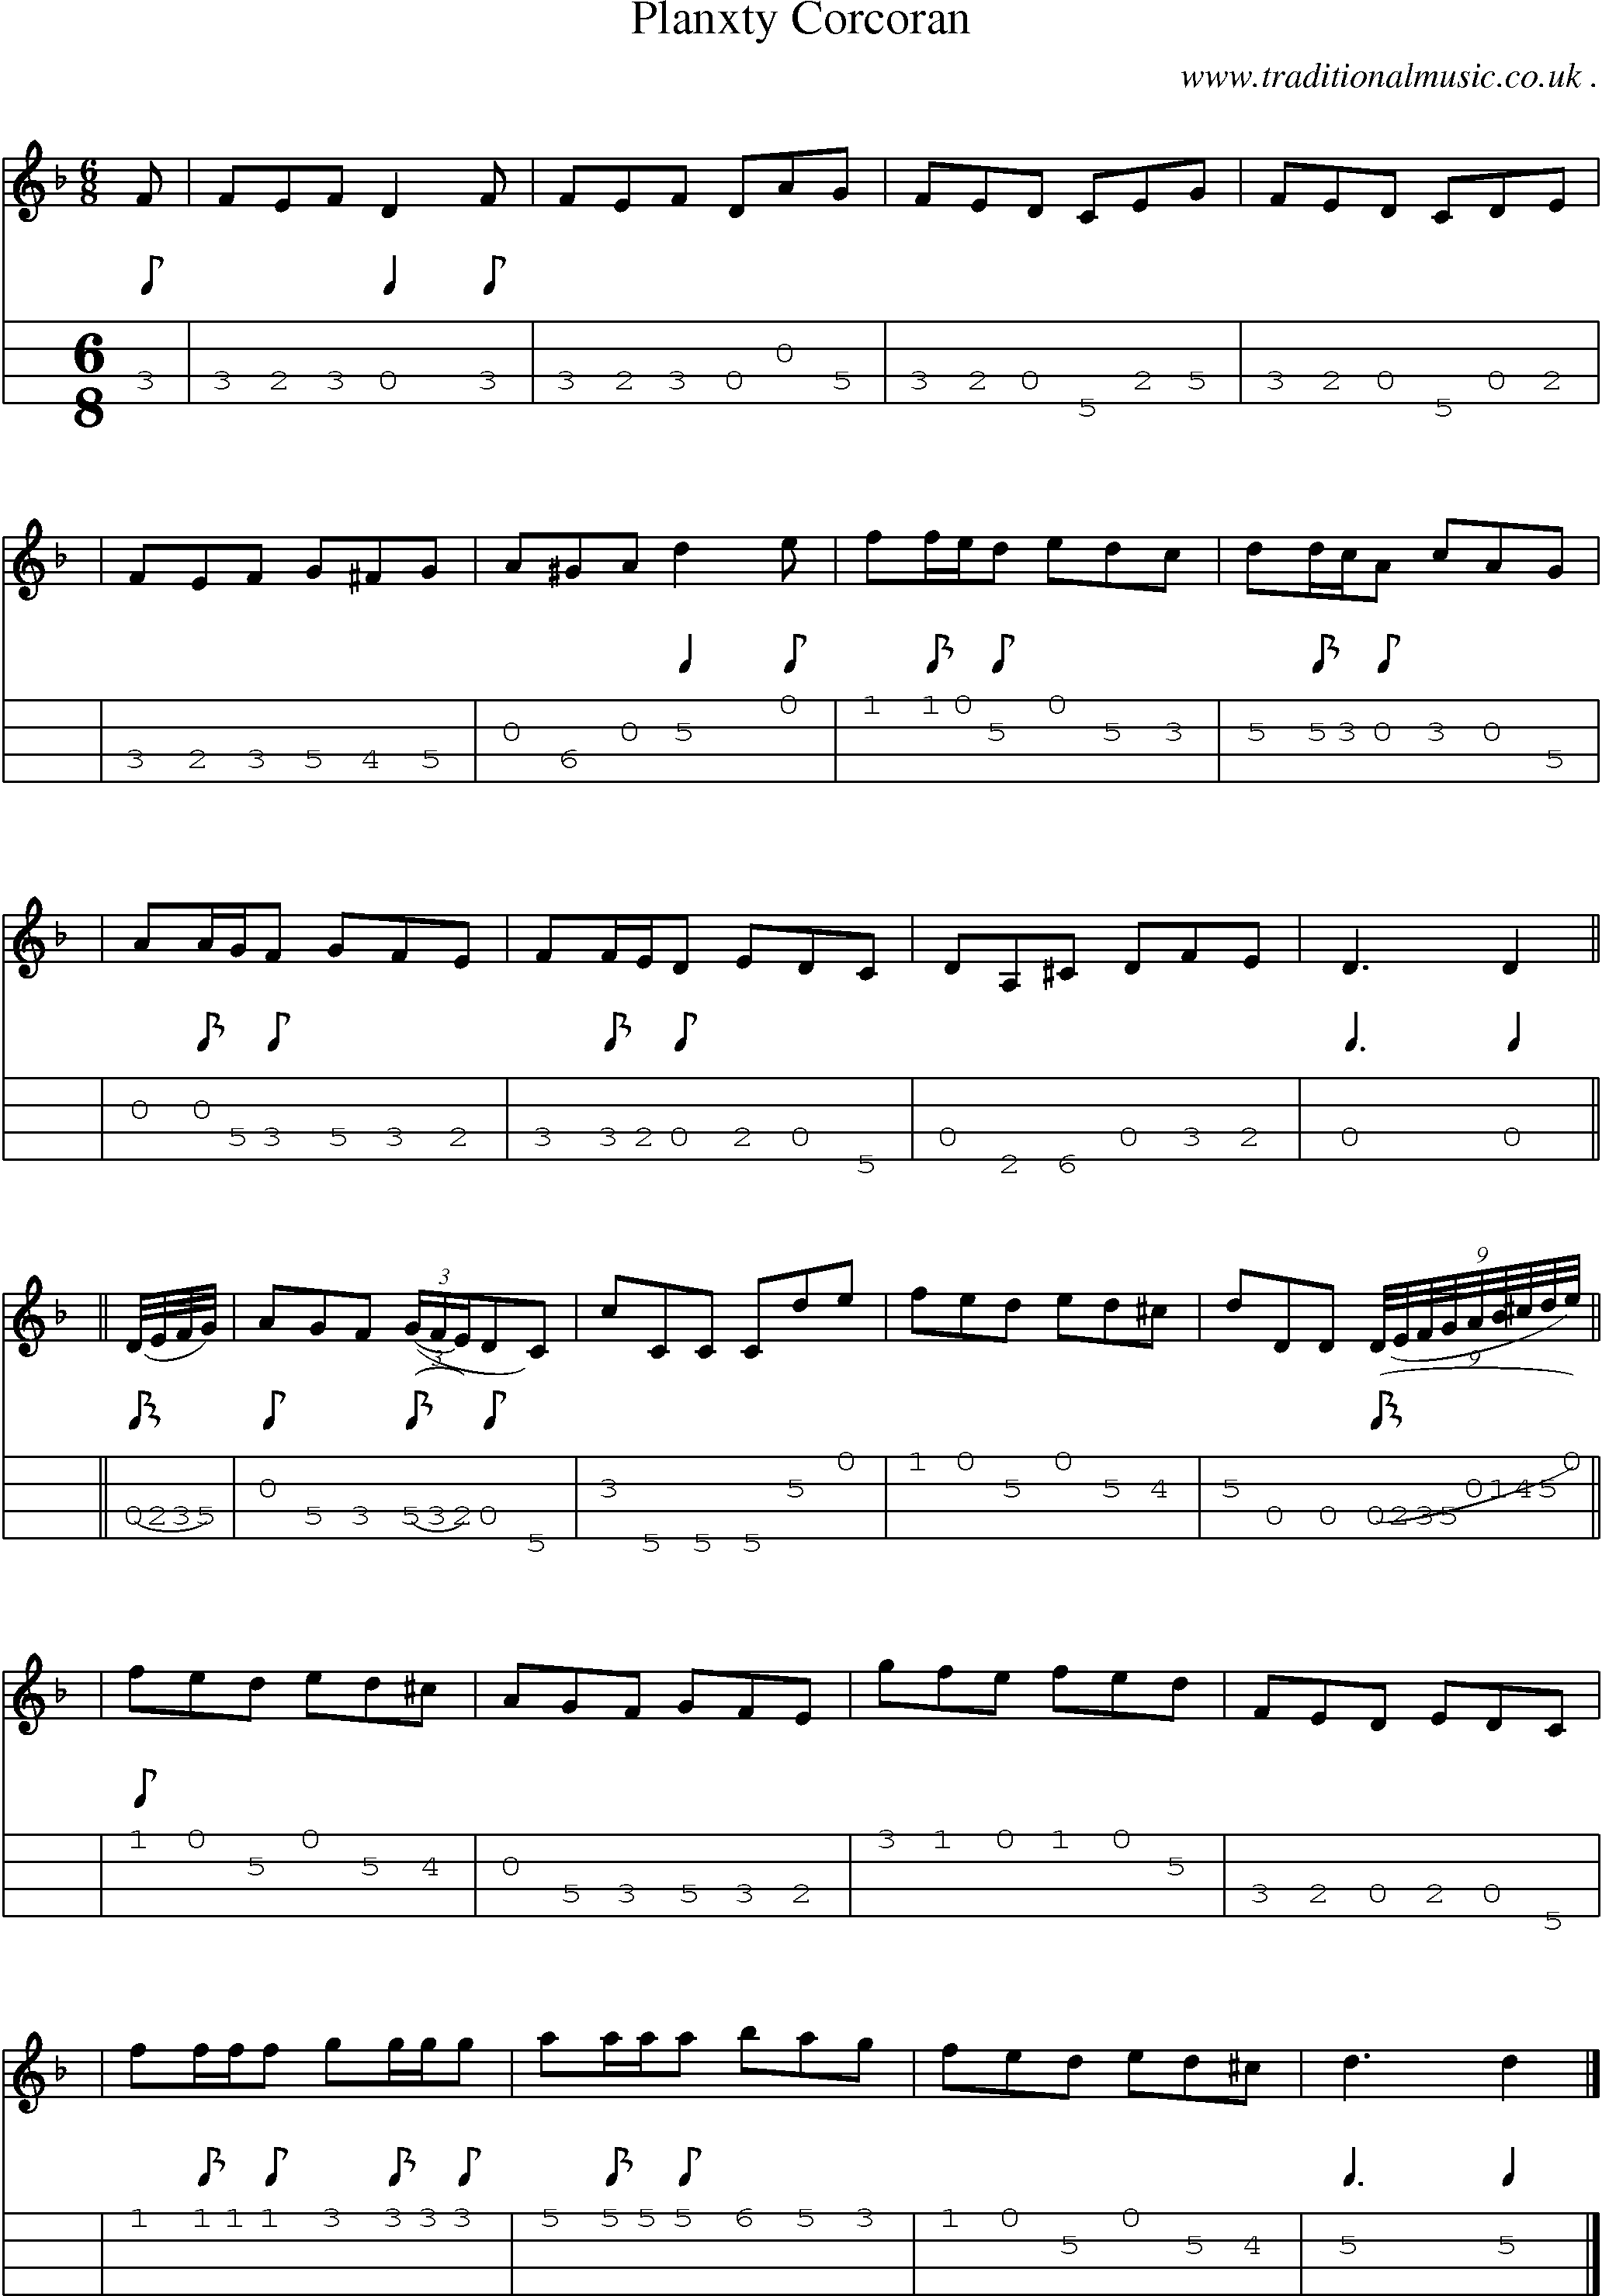 Sheet-music  score, Chords and Mandolin Tabs for Planxty Corcoran